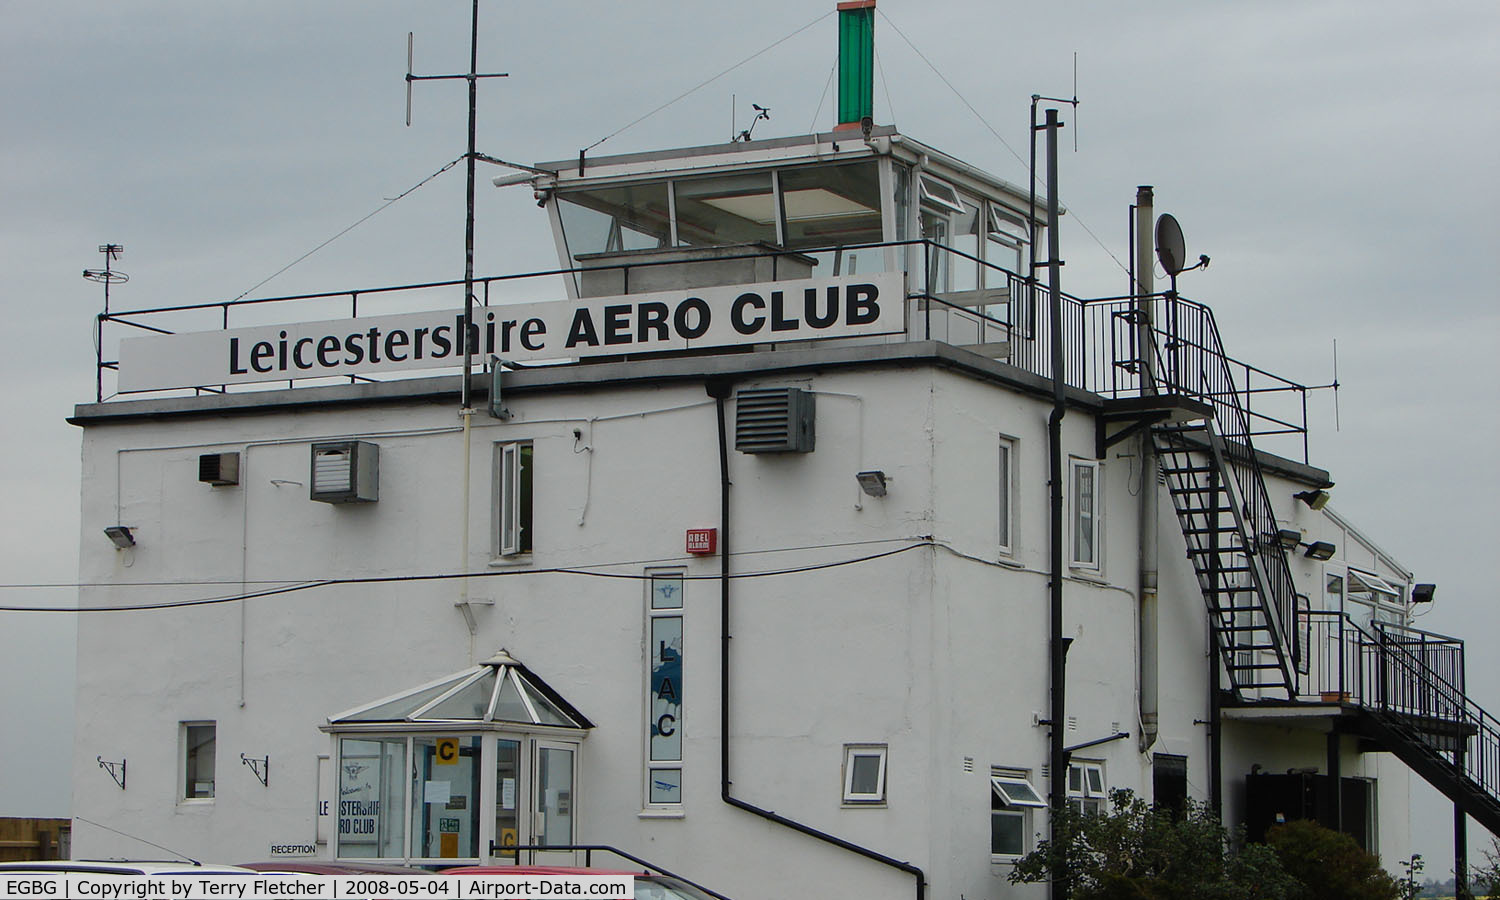 Leicester Airport, Leicester, England United Kingdom (EGBG) - Leicester Aero Club and Control Tower